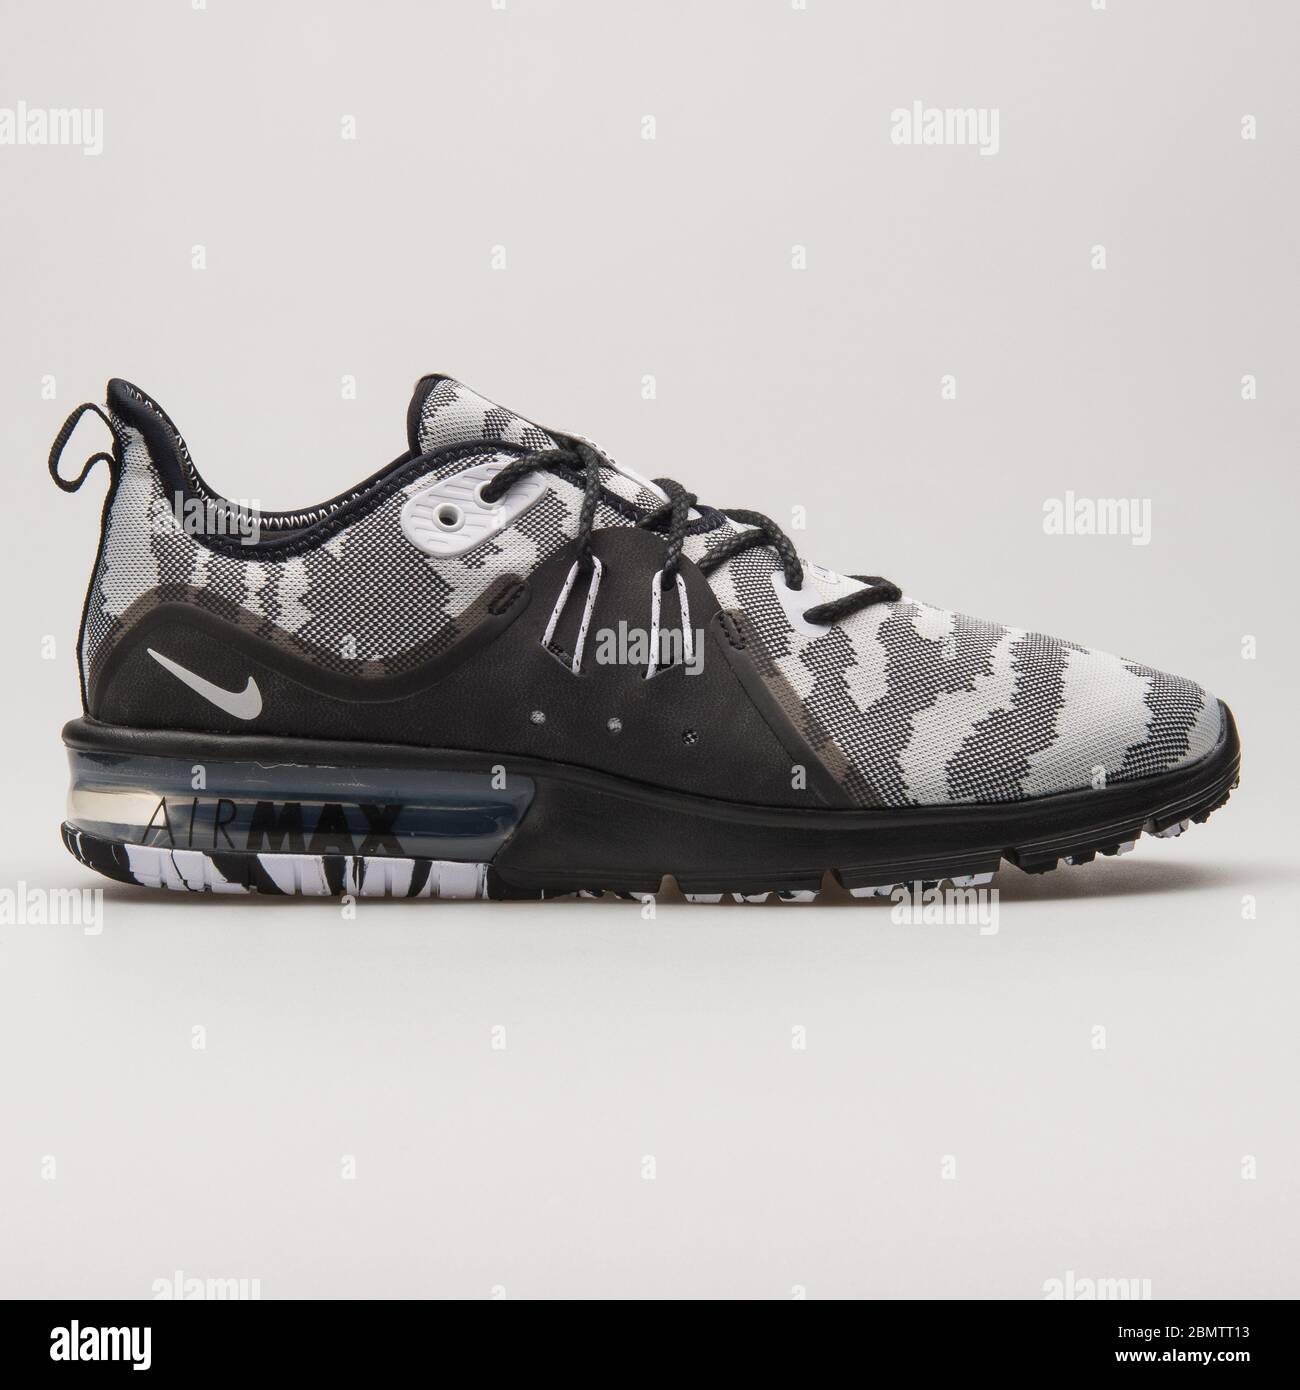 VIENNA, AUSTRIA - JUNE 14, 2018: Nike Air Max Sequent 3 Premium Camouflage  black and white sneaker on white background Stock Photo - Alamy